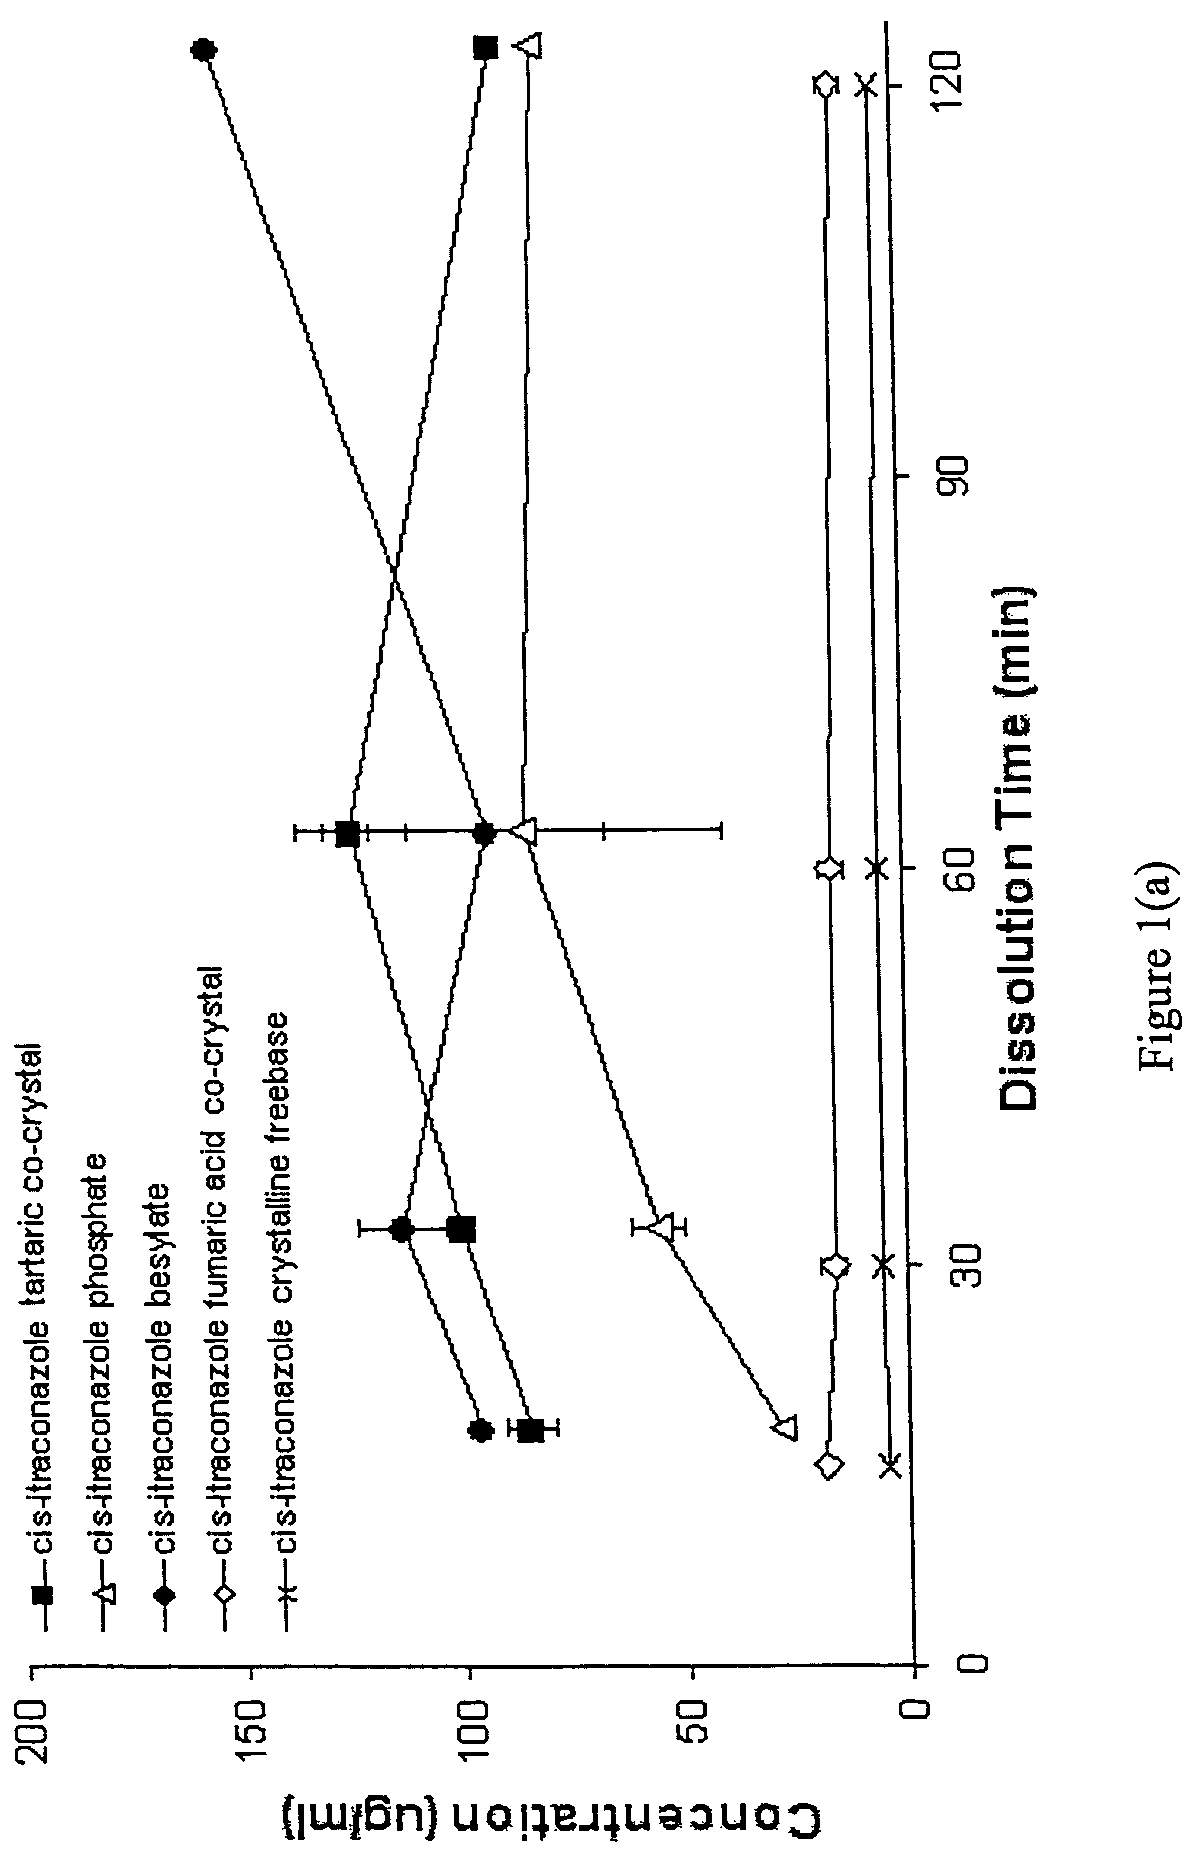 Crystalline forms of conazoles and methods of making and using the same